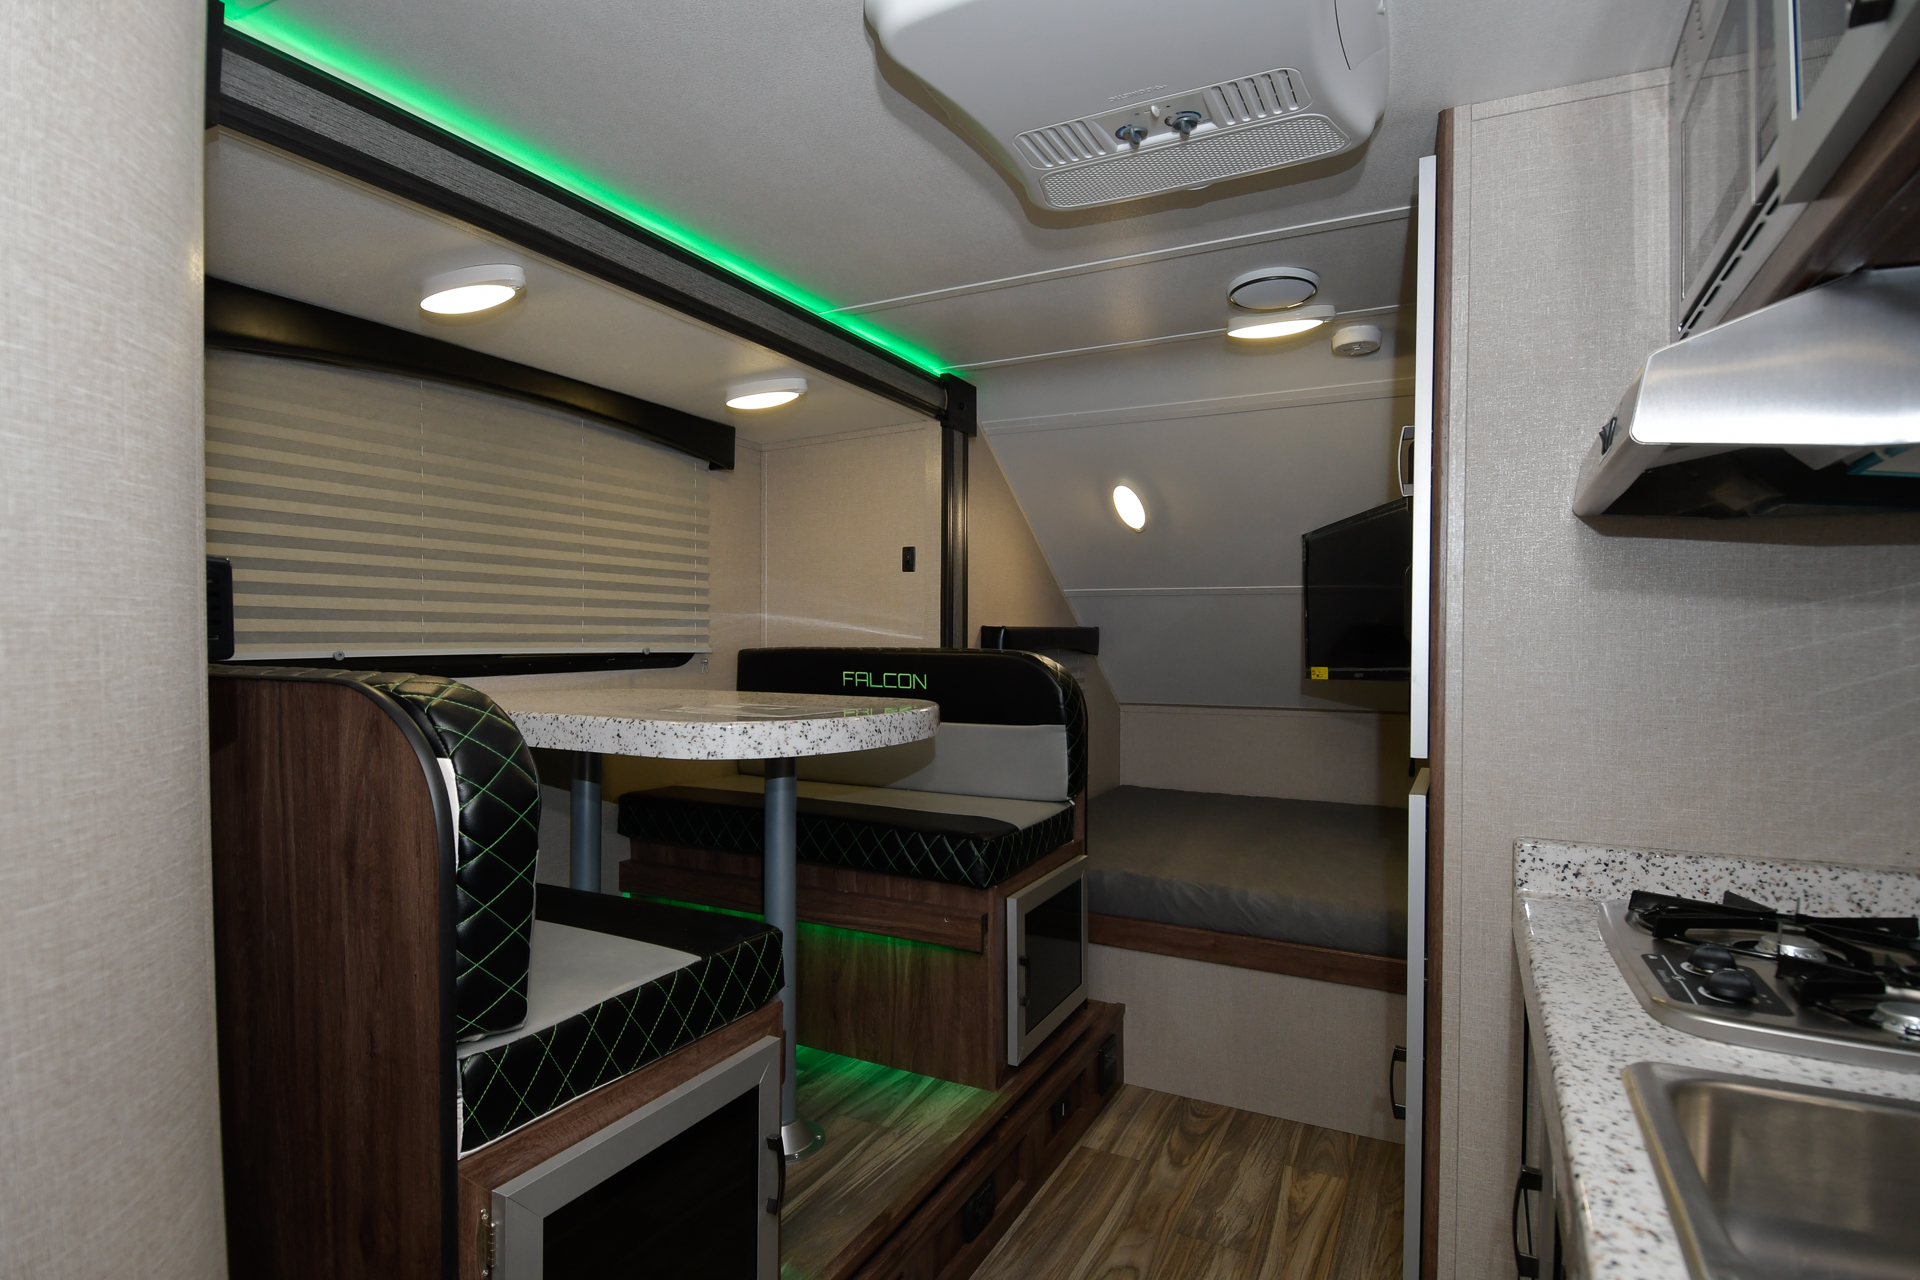 The Green Accent Lights in the Travel Lite Falcon can be toggled on or off